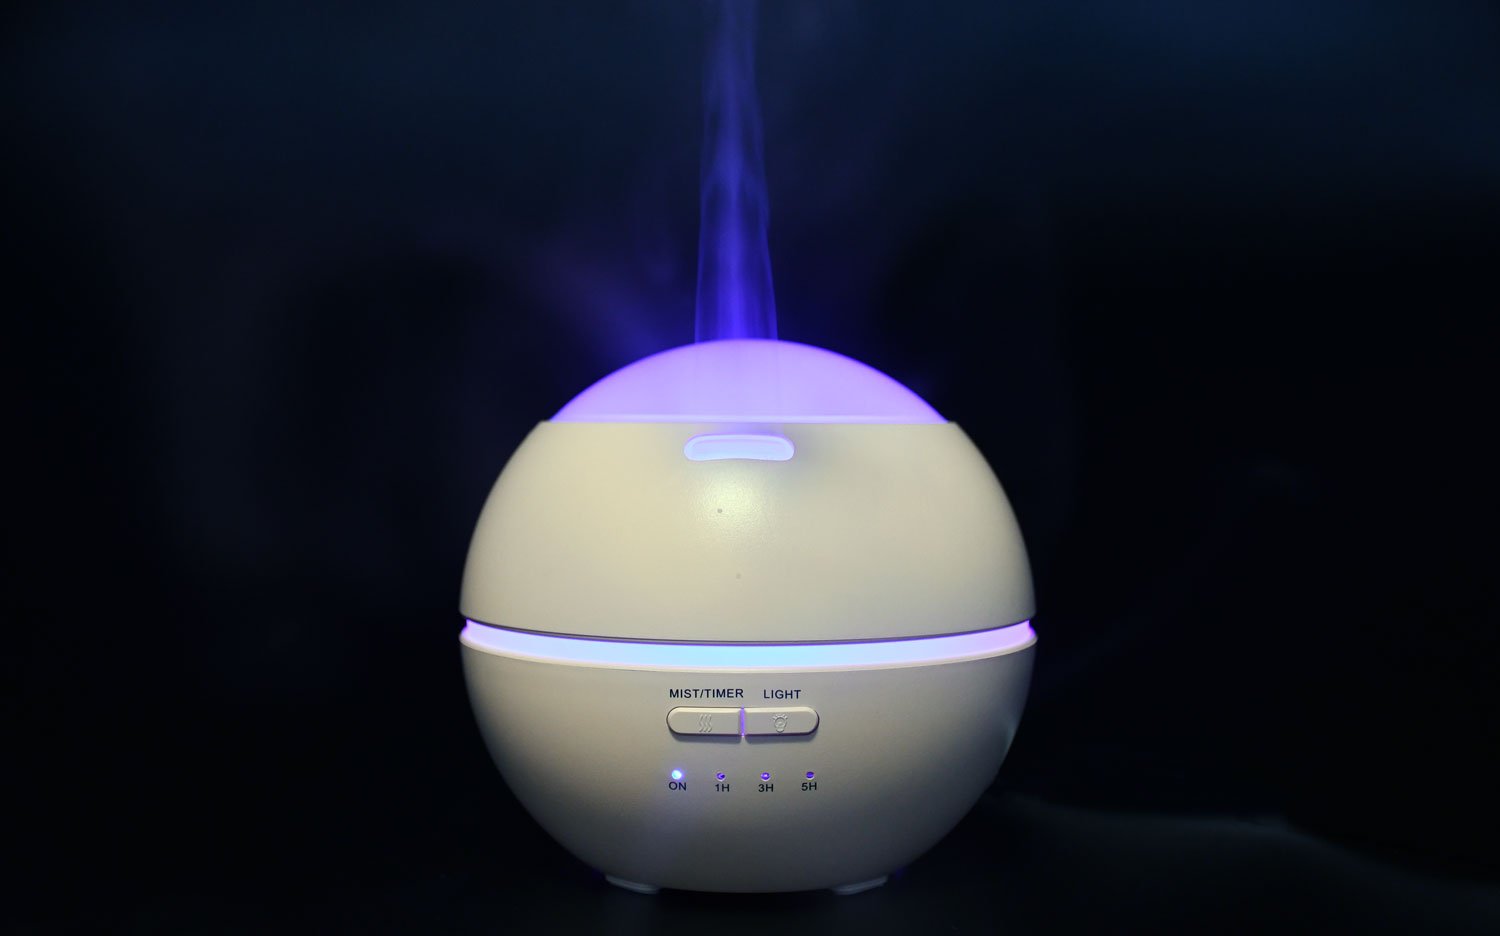 ONA misting dome is a neutralising diffuser unit that provides natural odour elimination - an electronic odour neutraliser working to remove foul smells from the atmosphere